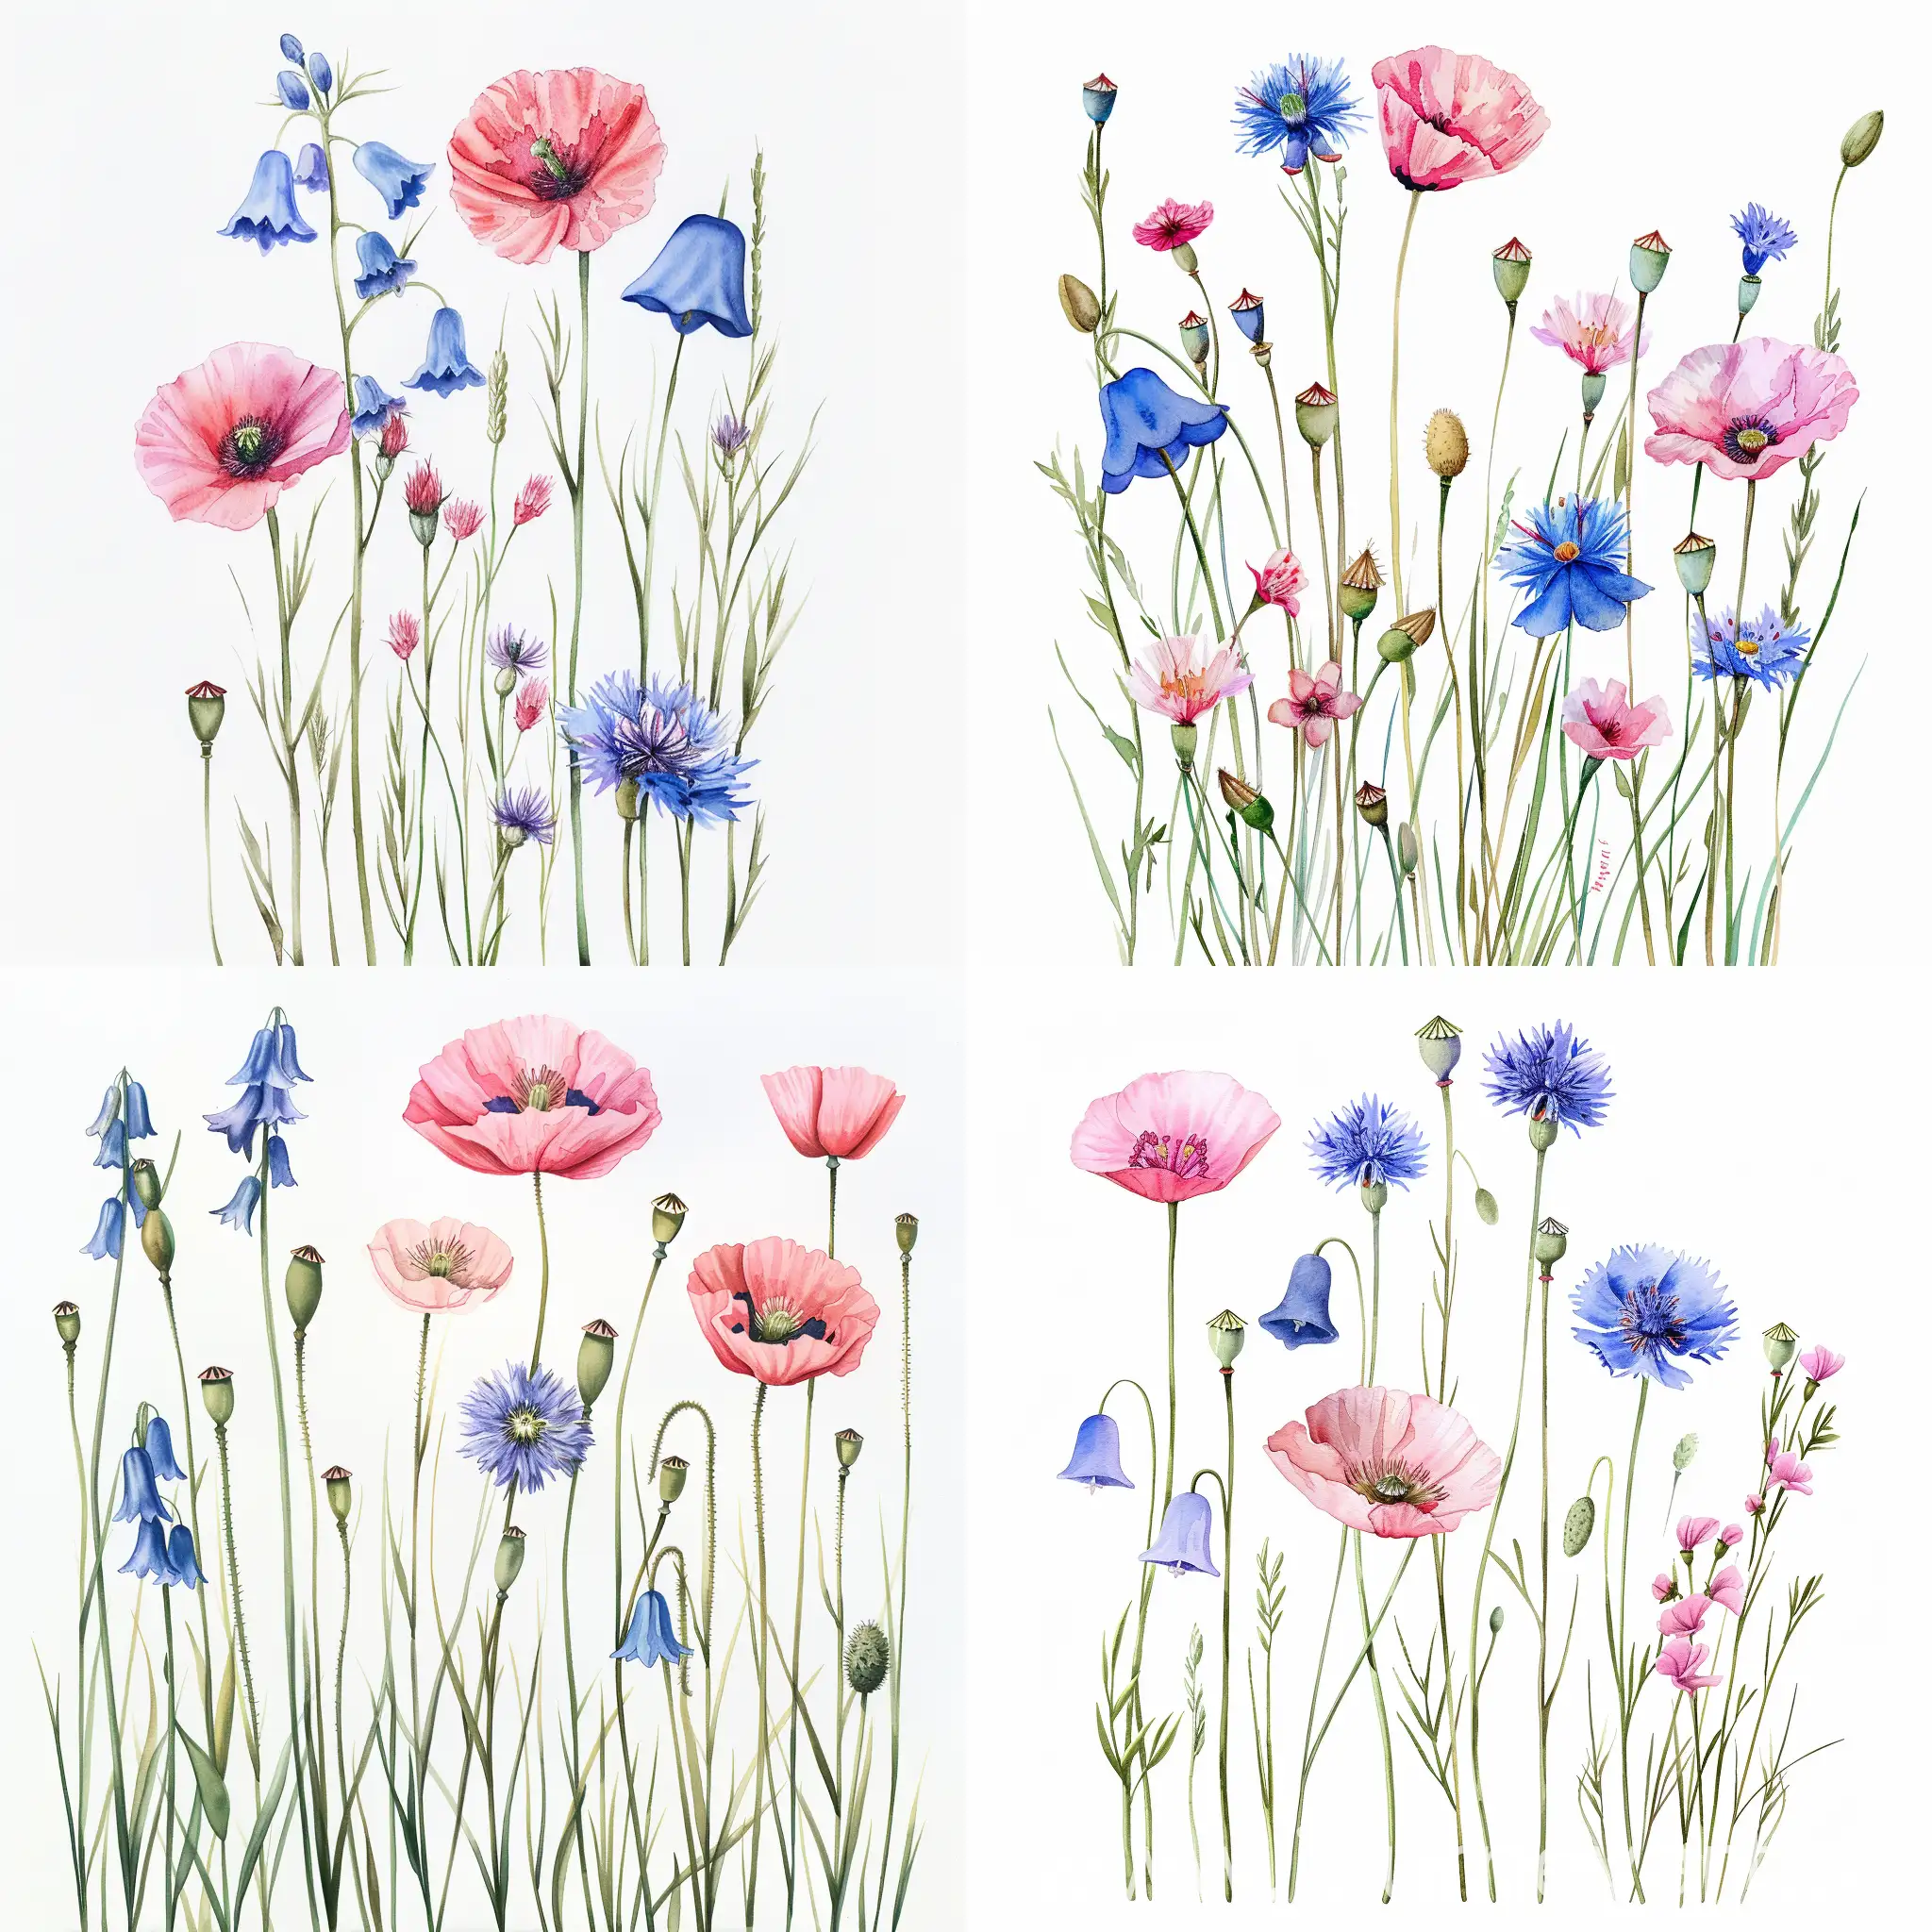 watercolor standing wildflower, bellflowers, cornflowers and pink poppy, on white background, soft handpainted, detailed, color on stalks ADBA93
